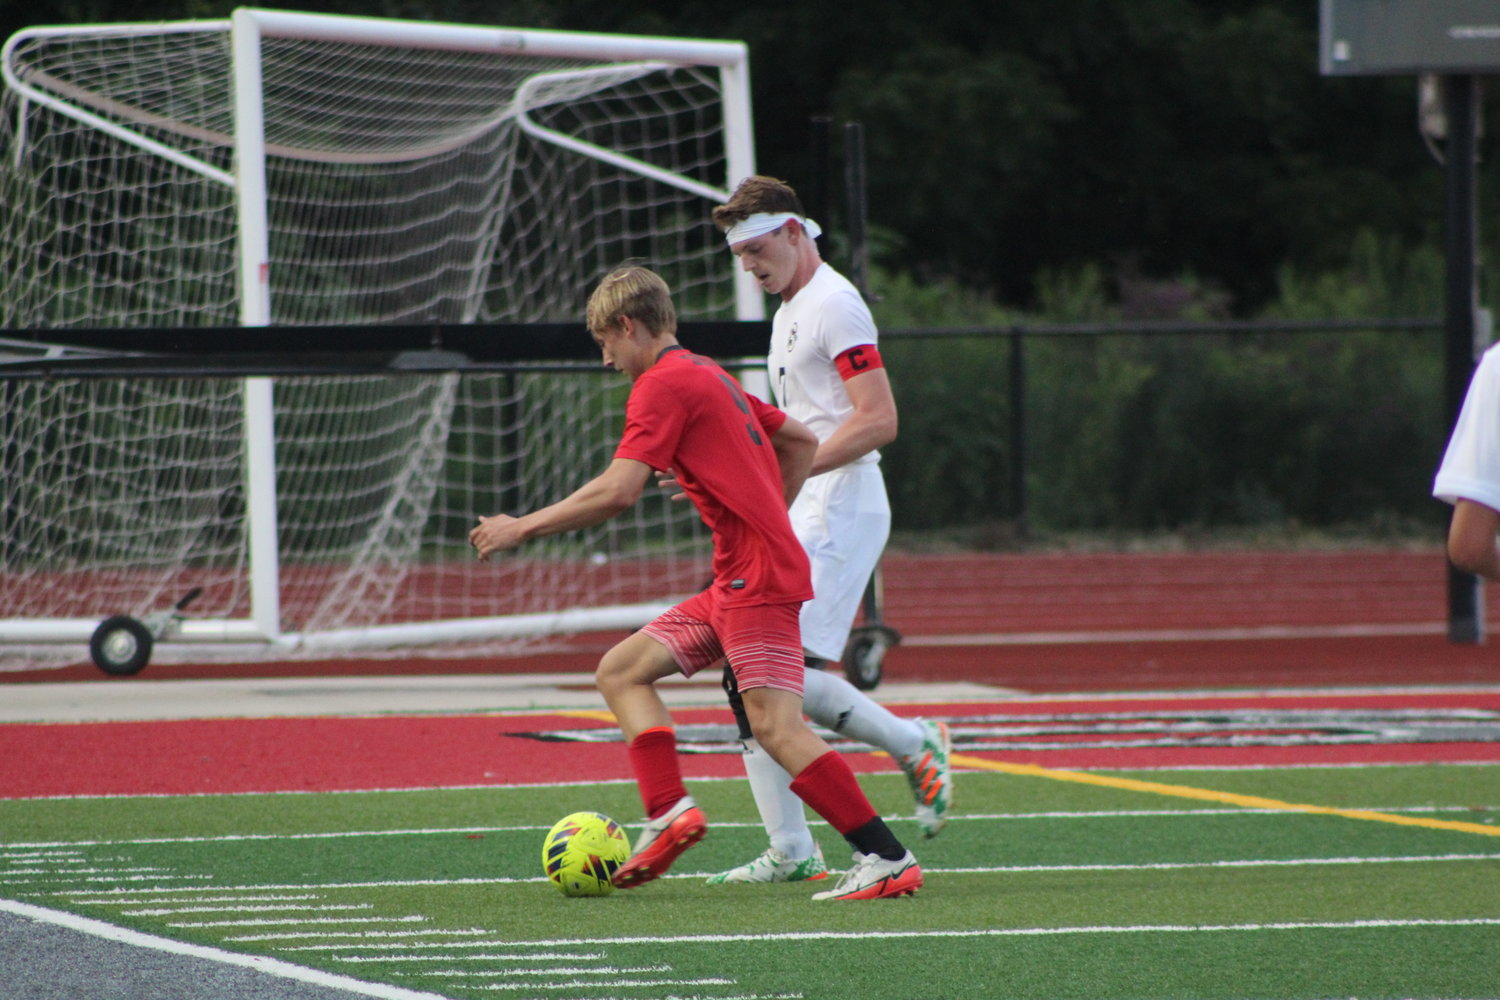 Tyler Petroski scored one of the three goals for the Mounties in the boys game.